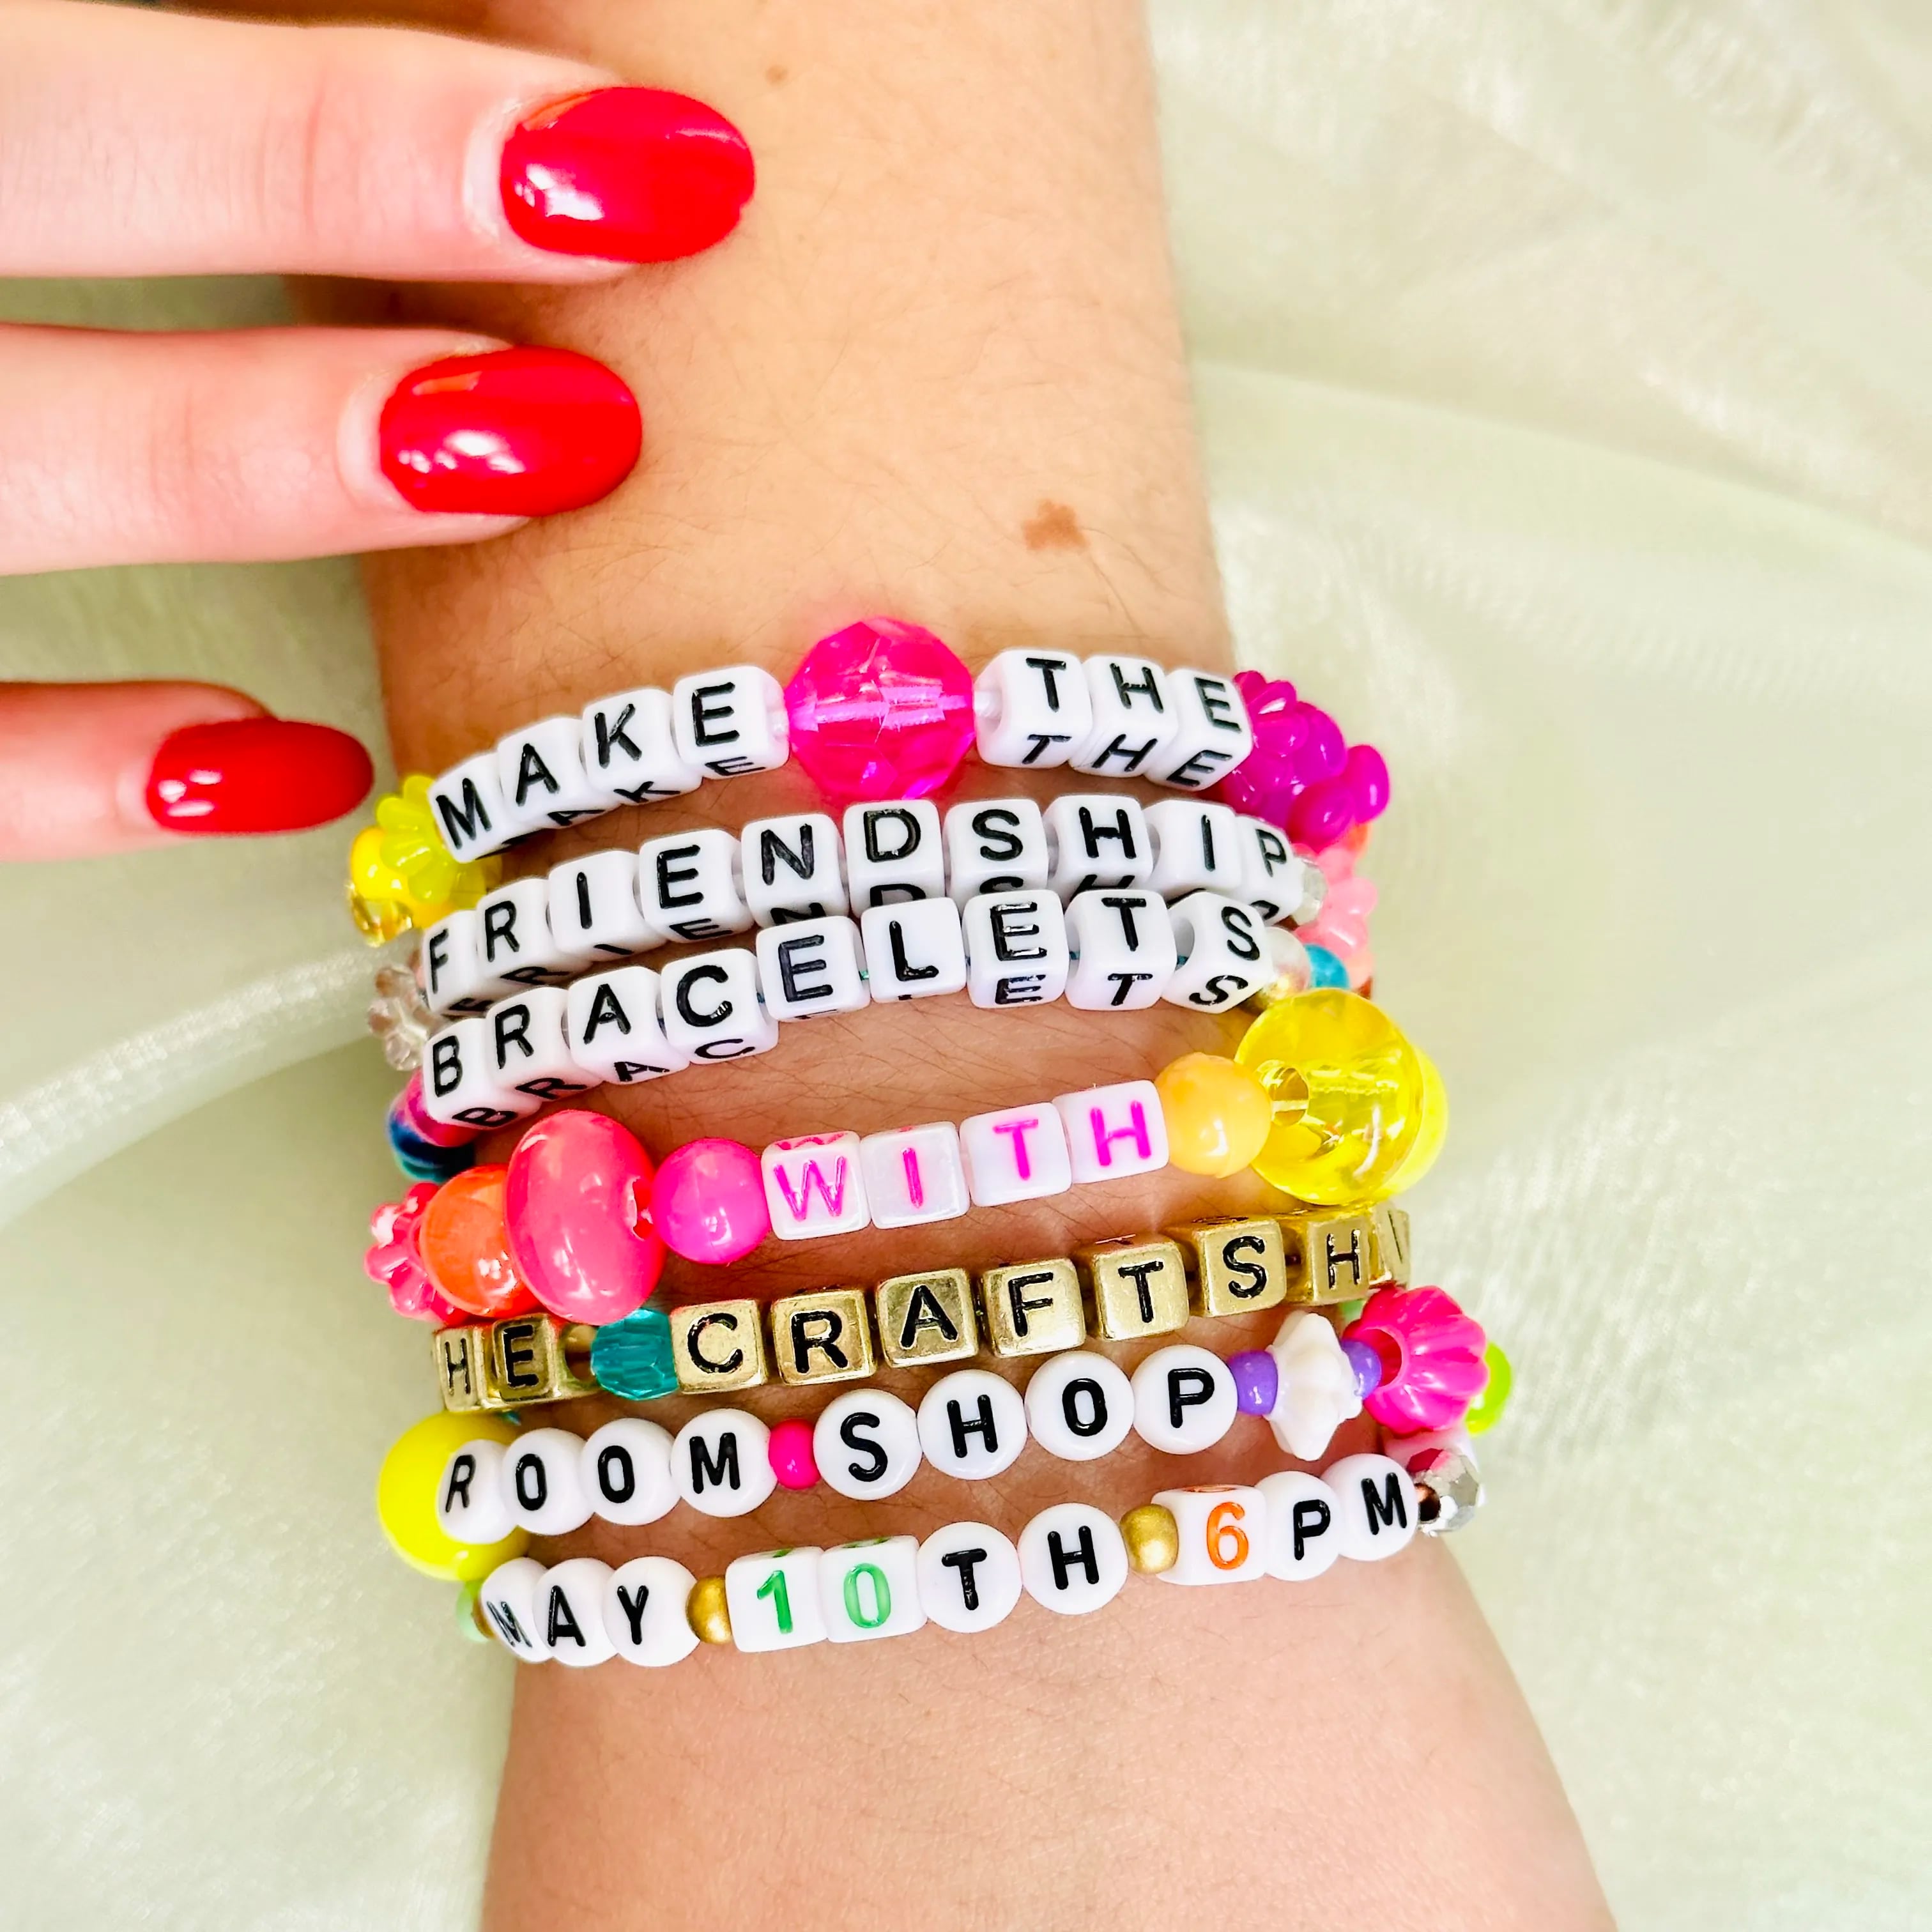 Make a friendship bracelet at The Craftship in the Bok Building for the Taylor Swift concert.